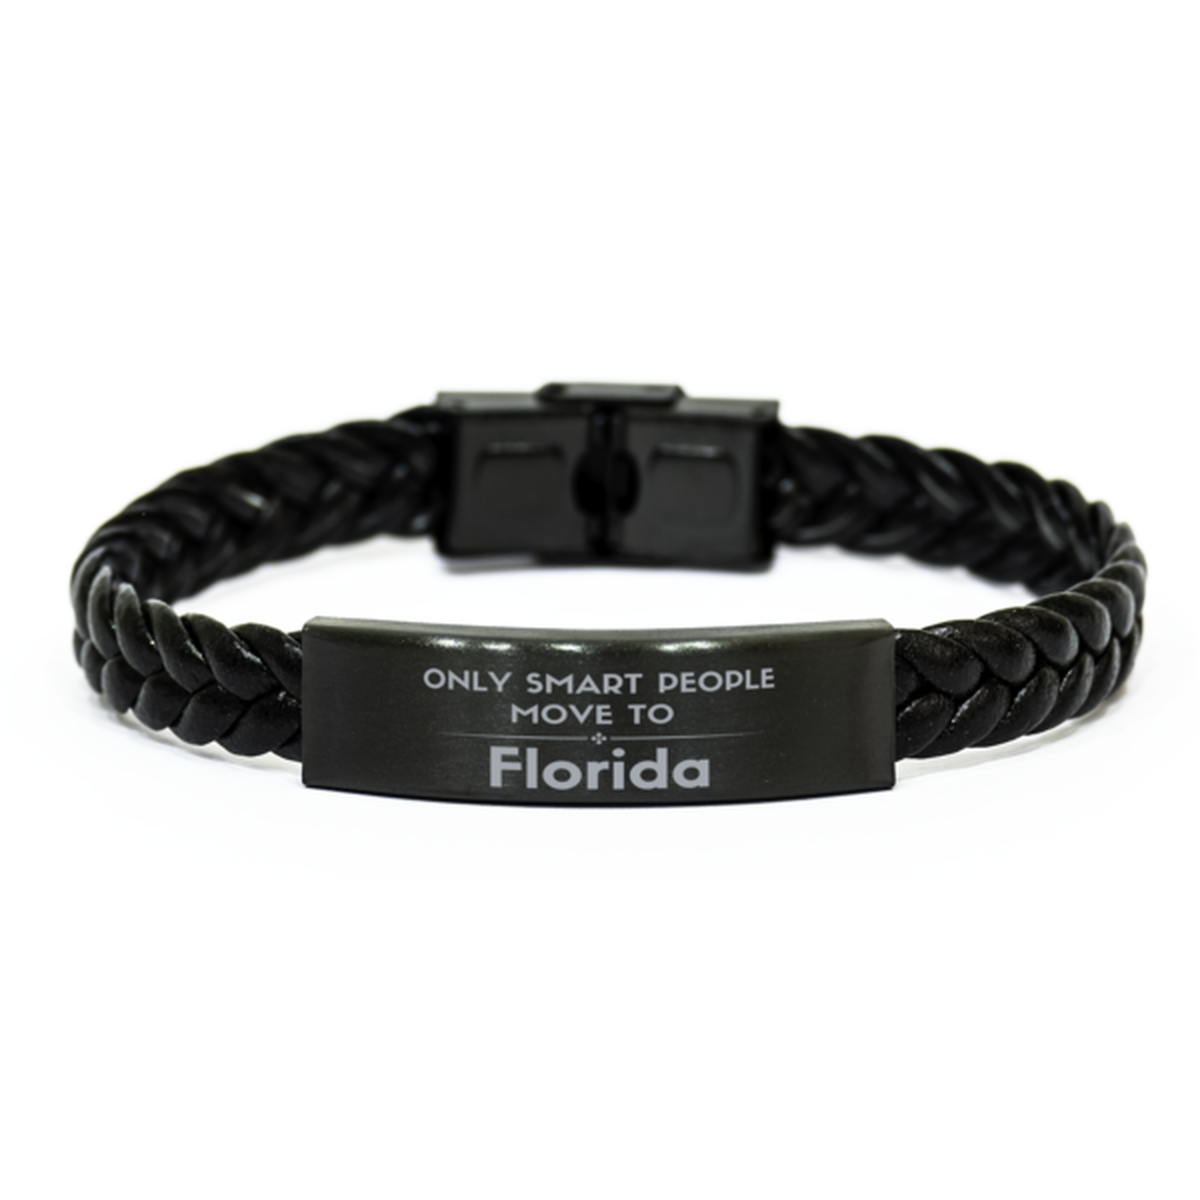 Only smart people move to Florida Braided Leather Bracelet, Gag Gifts For Florida, Move to Florida Gifts for Friends Coworker Funny Saying Quote